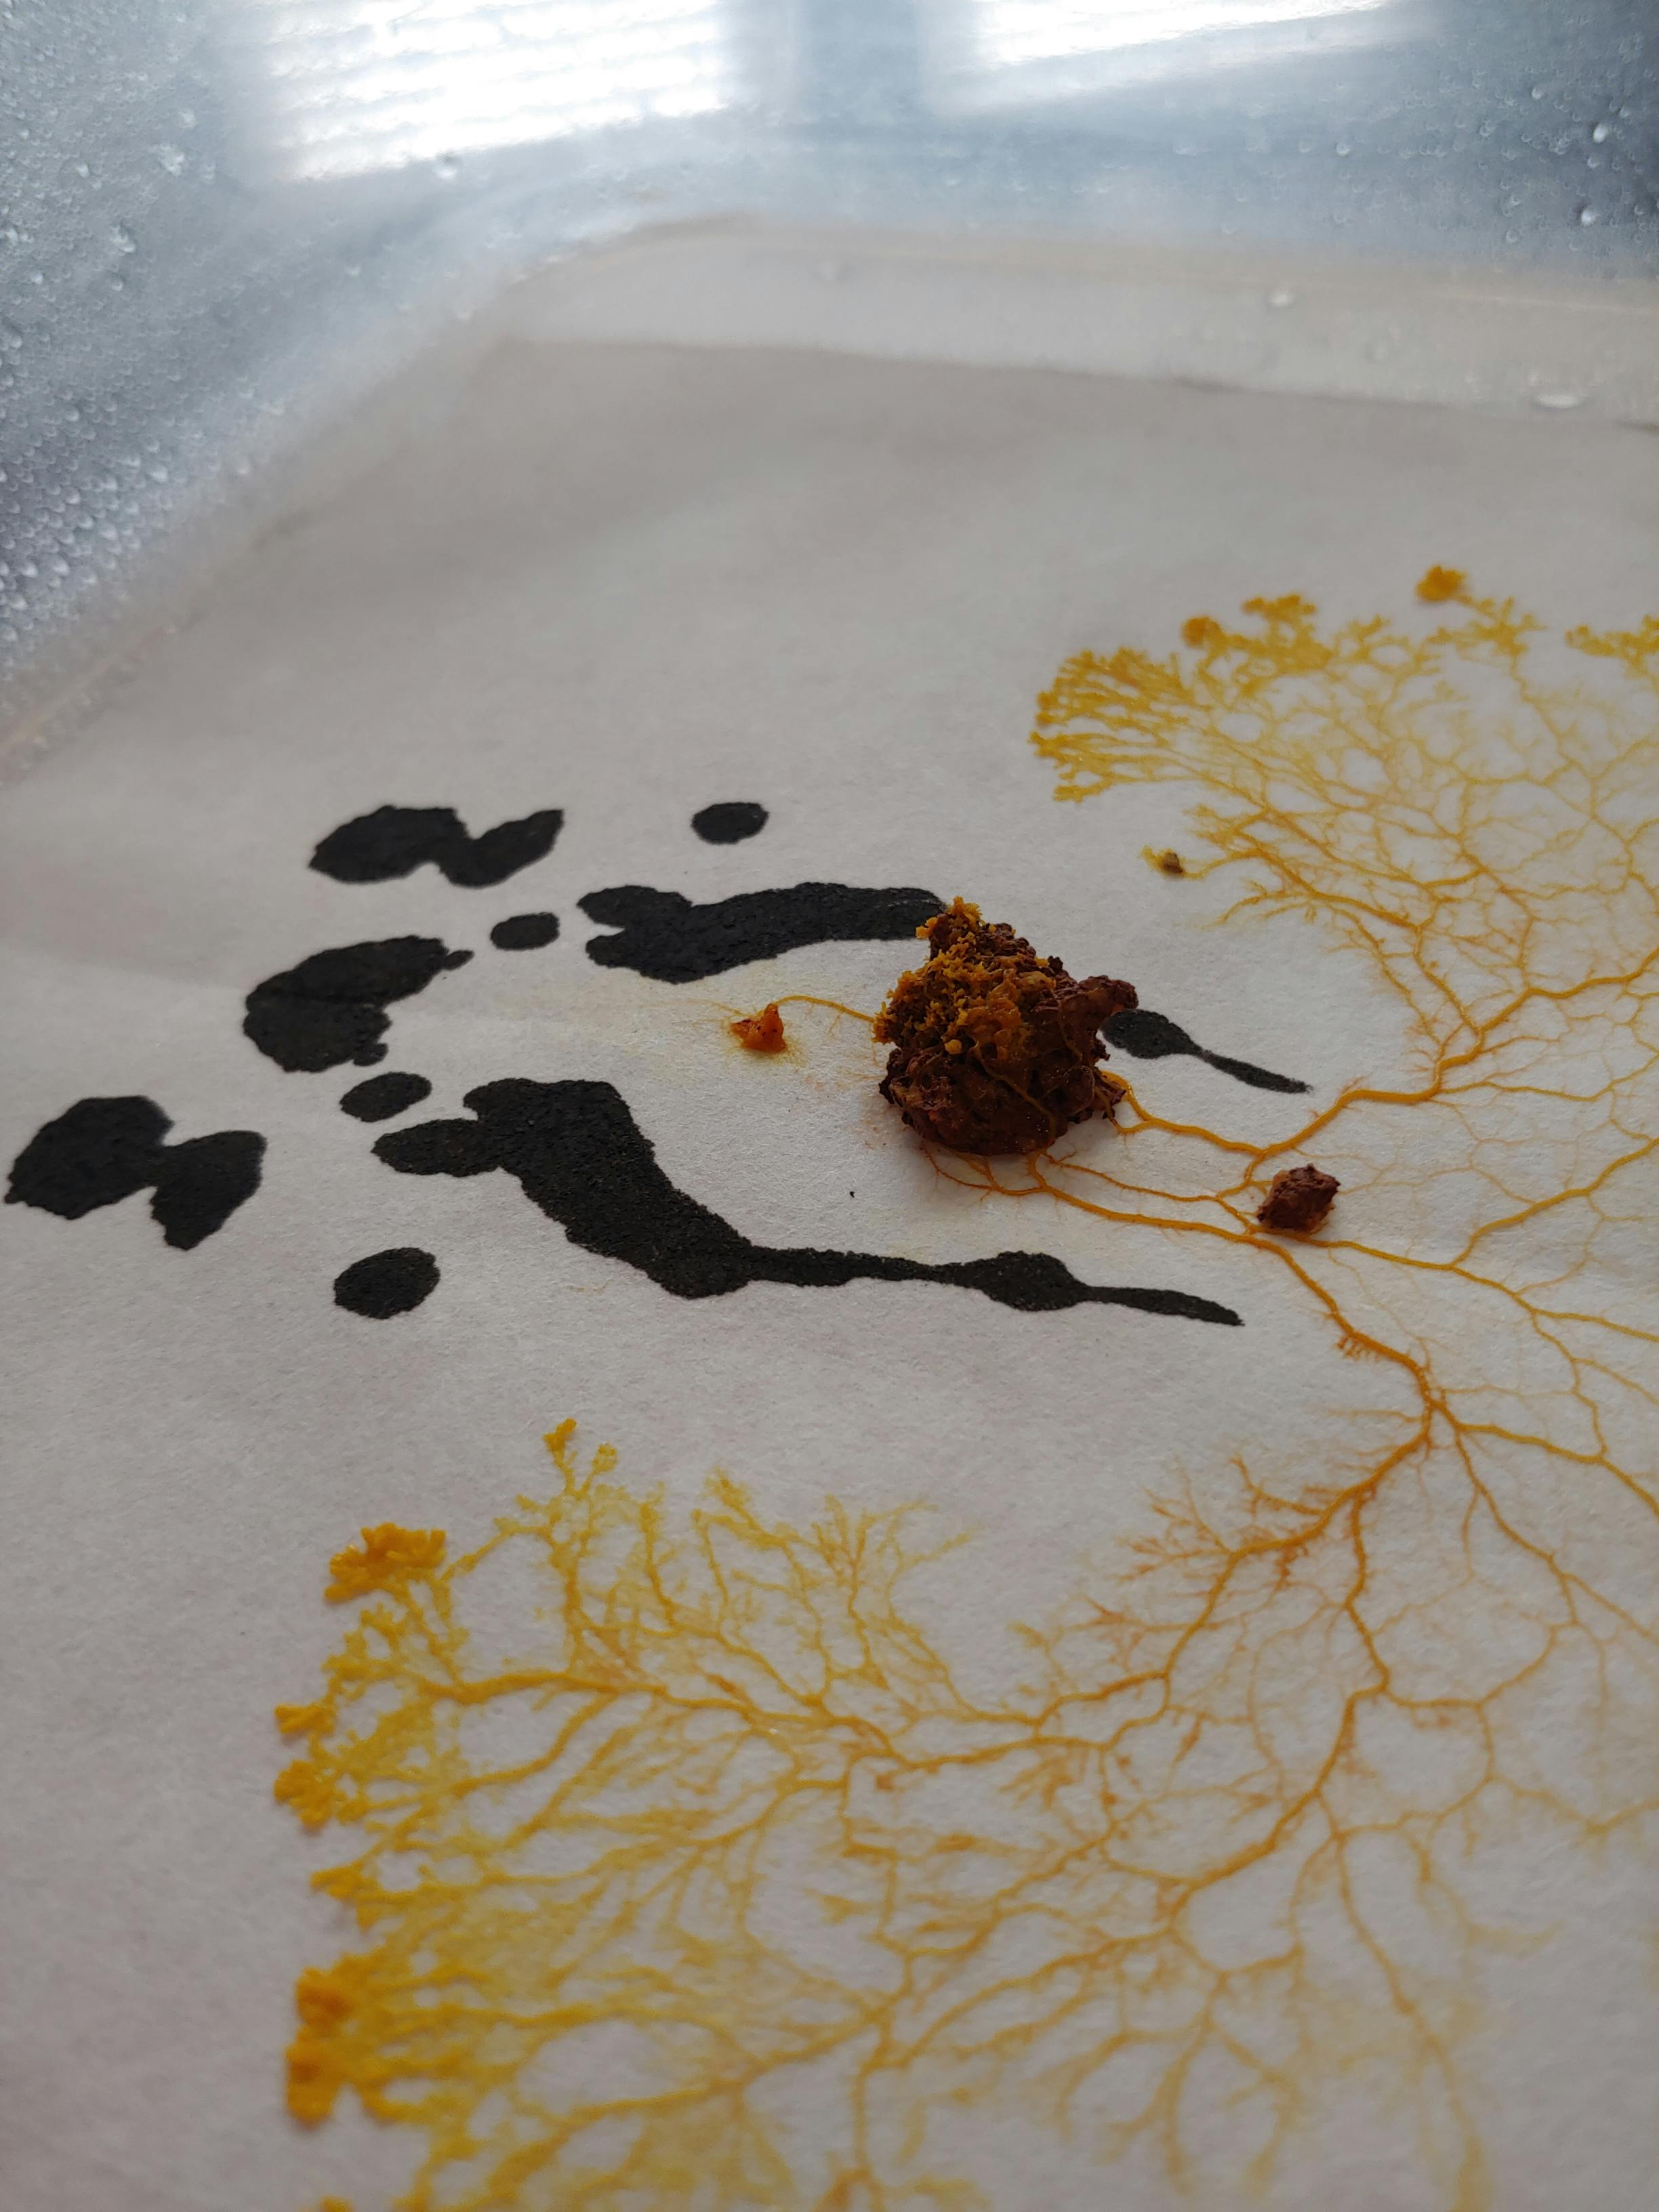 inkblot drawing on paper with slime mold creating an anatomical pattern on the paper